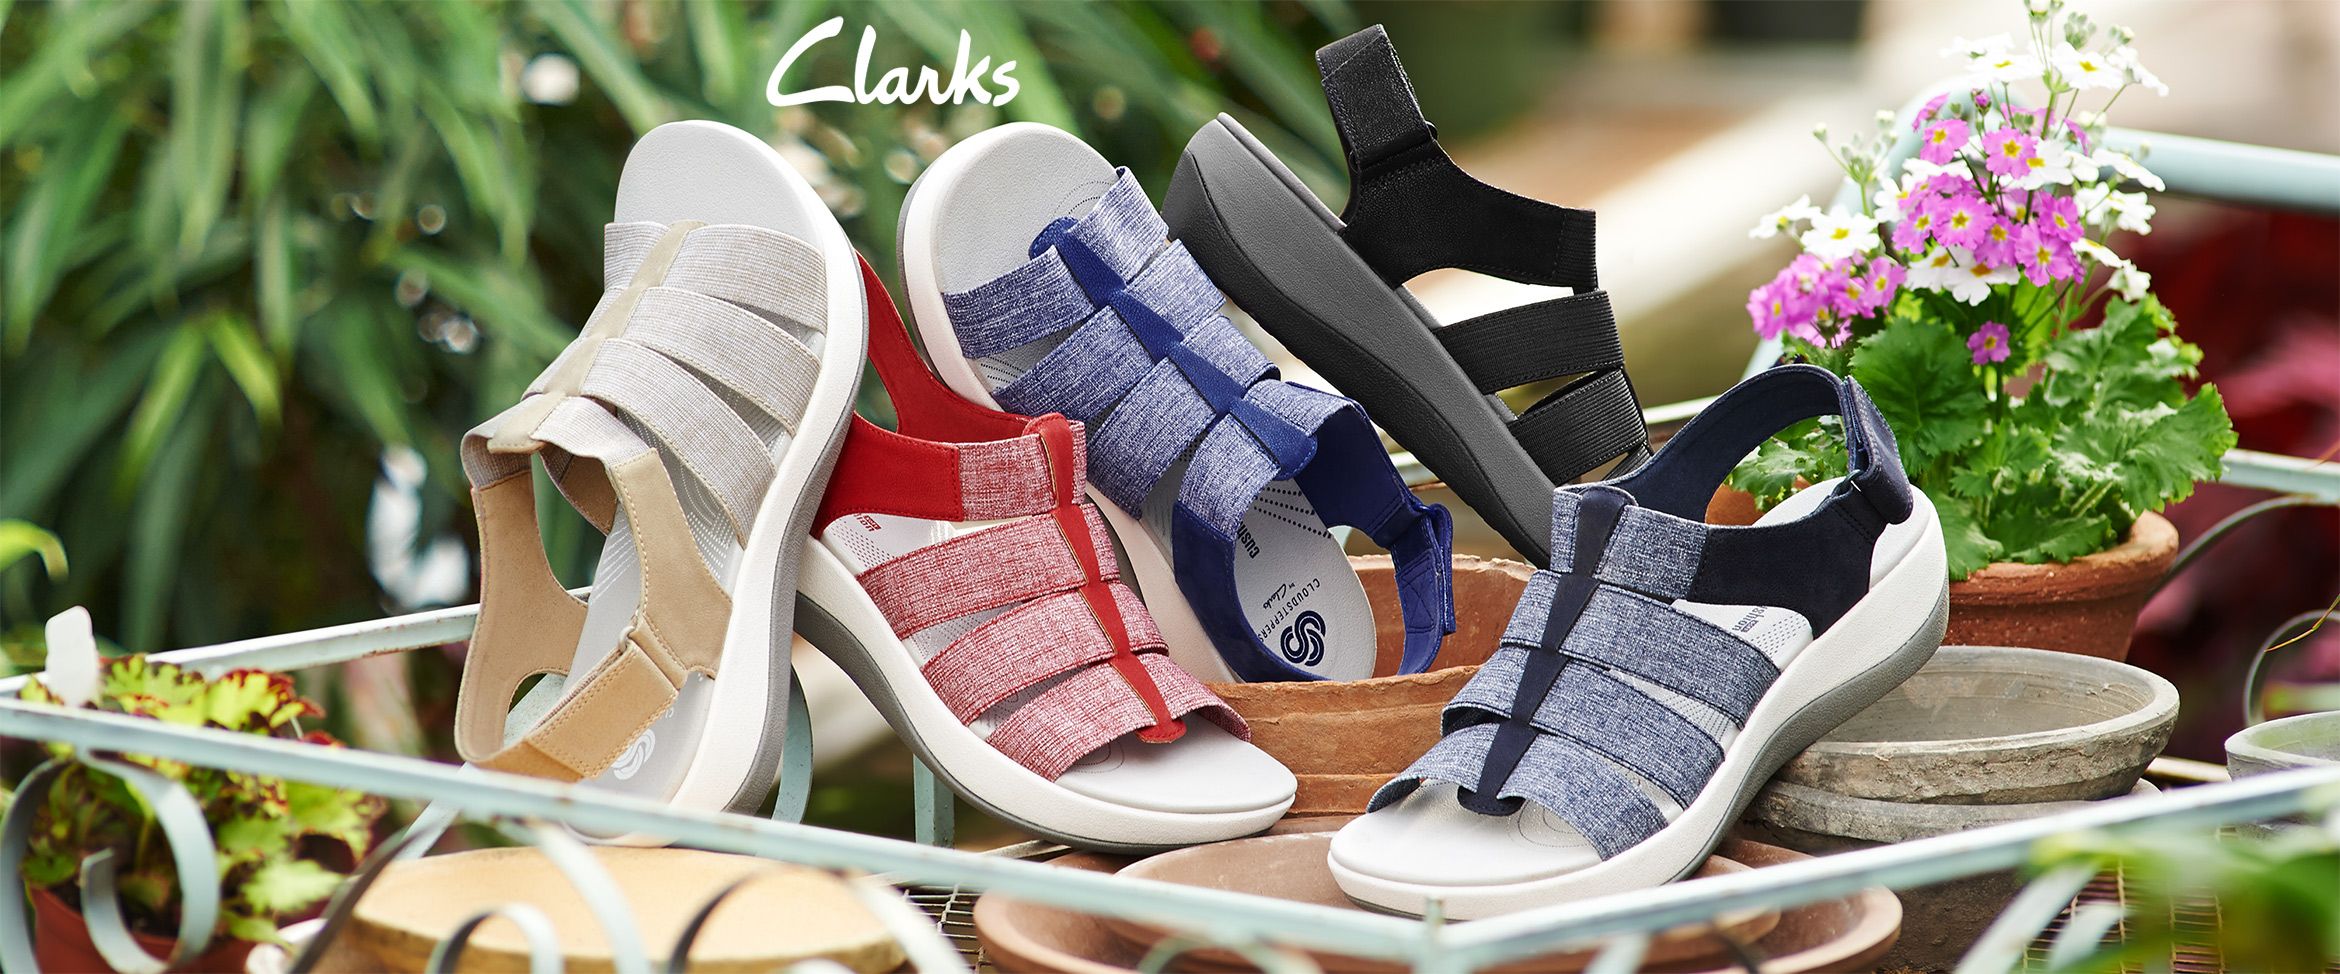 clarks cloudsteppers sandals arla shaylie